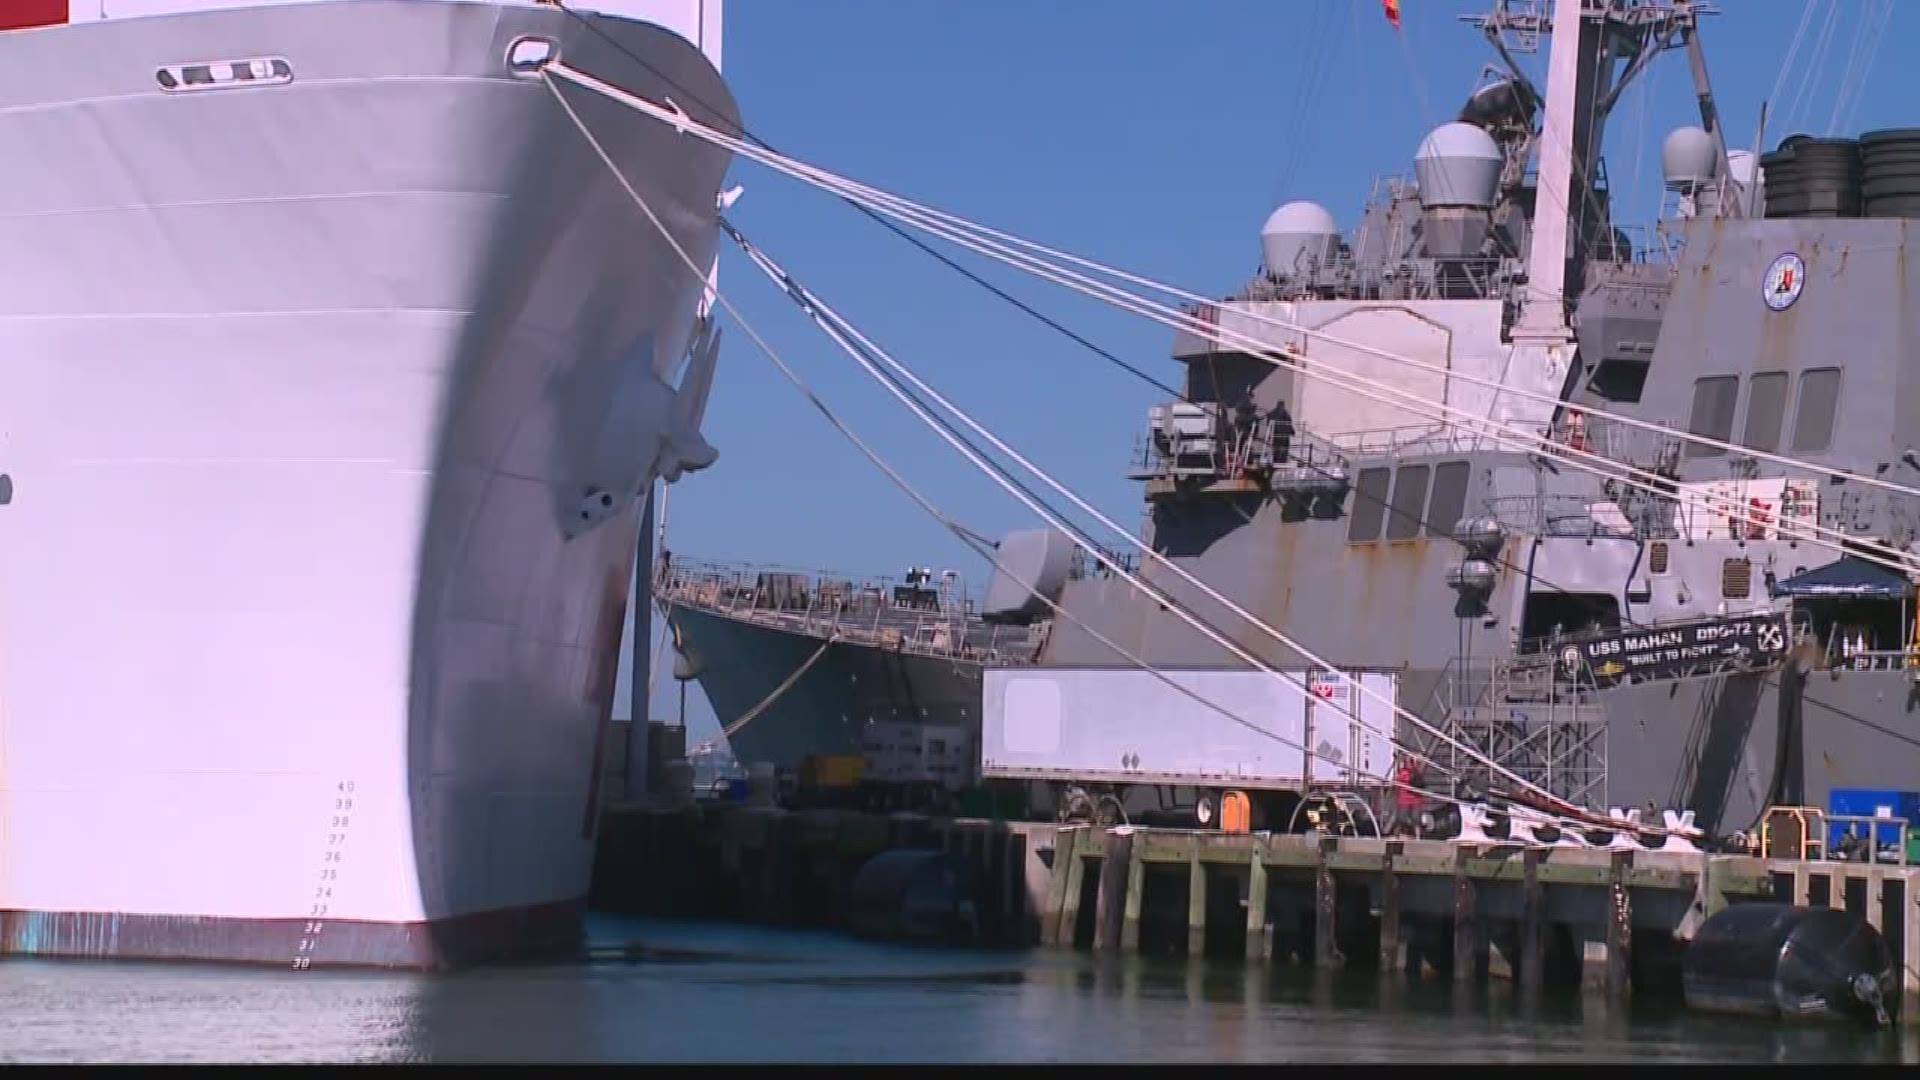 A U.S. Navy hospital ship is deploying to Puerto Rico to bring medical care to the hurricane-ravaged island.